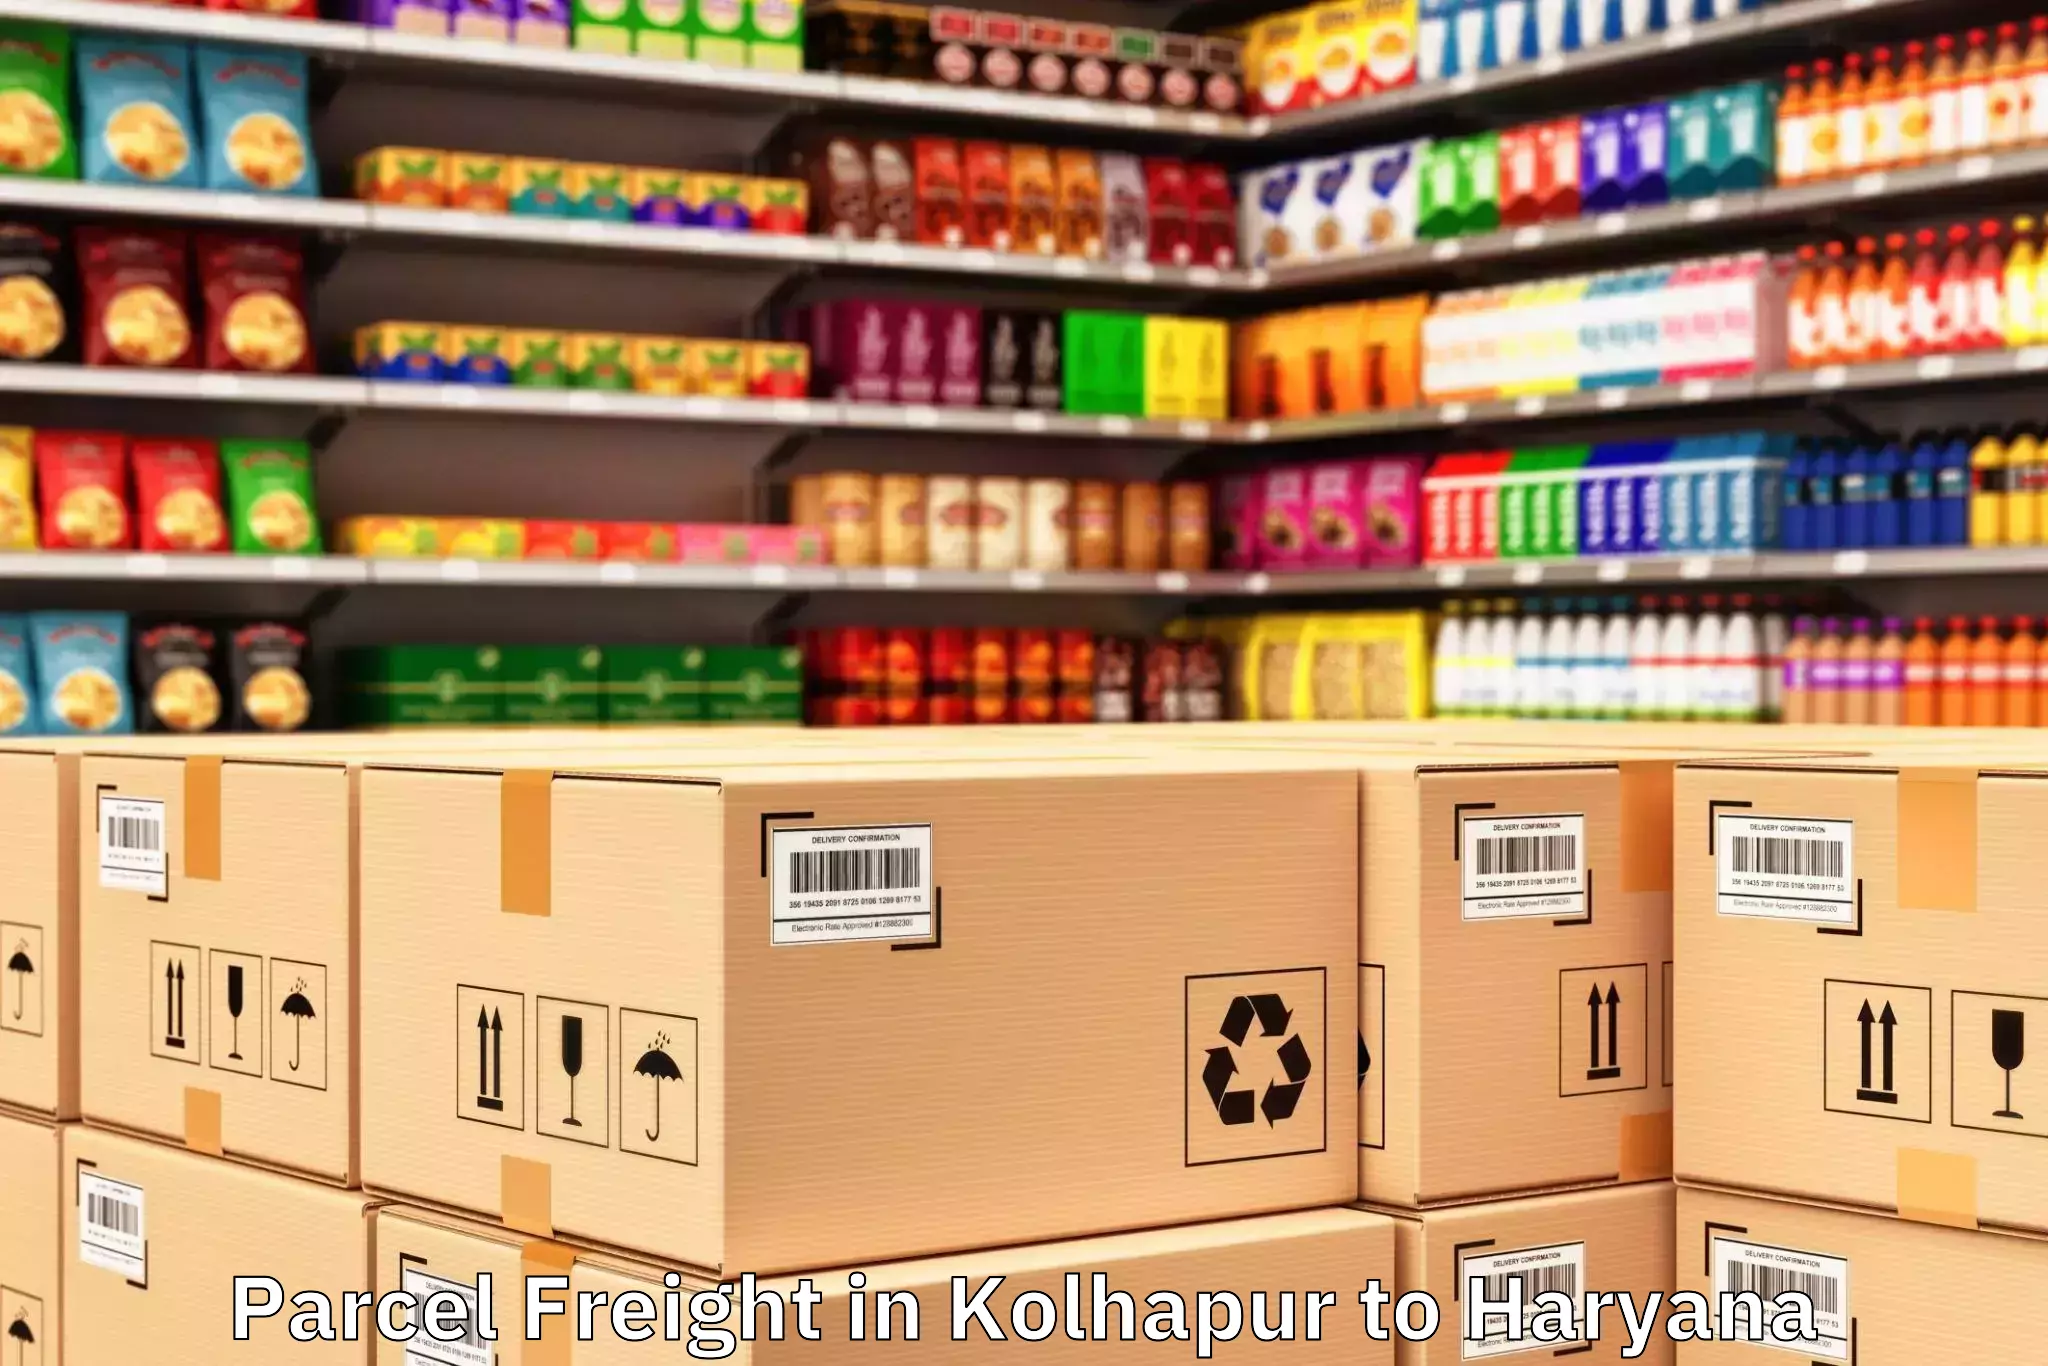 Reliable Kolhapur to Mittals Mega Mall Parcel Freight